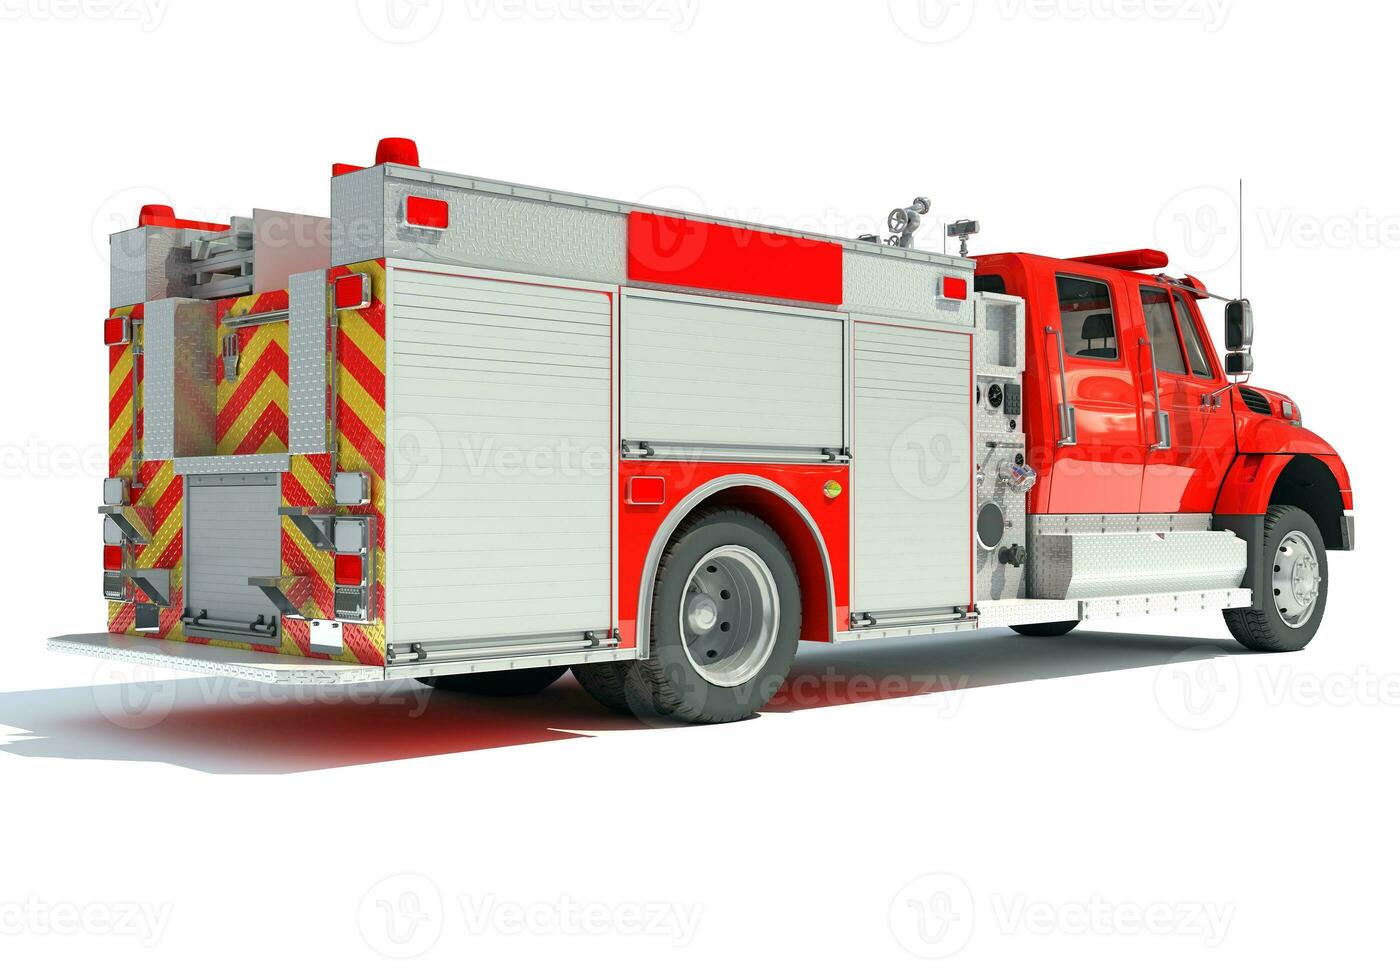 Rescue Fire Pumper Truck 3D rendering on white background photo